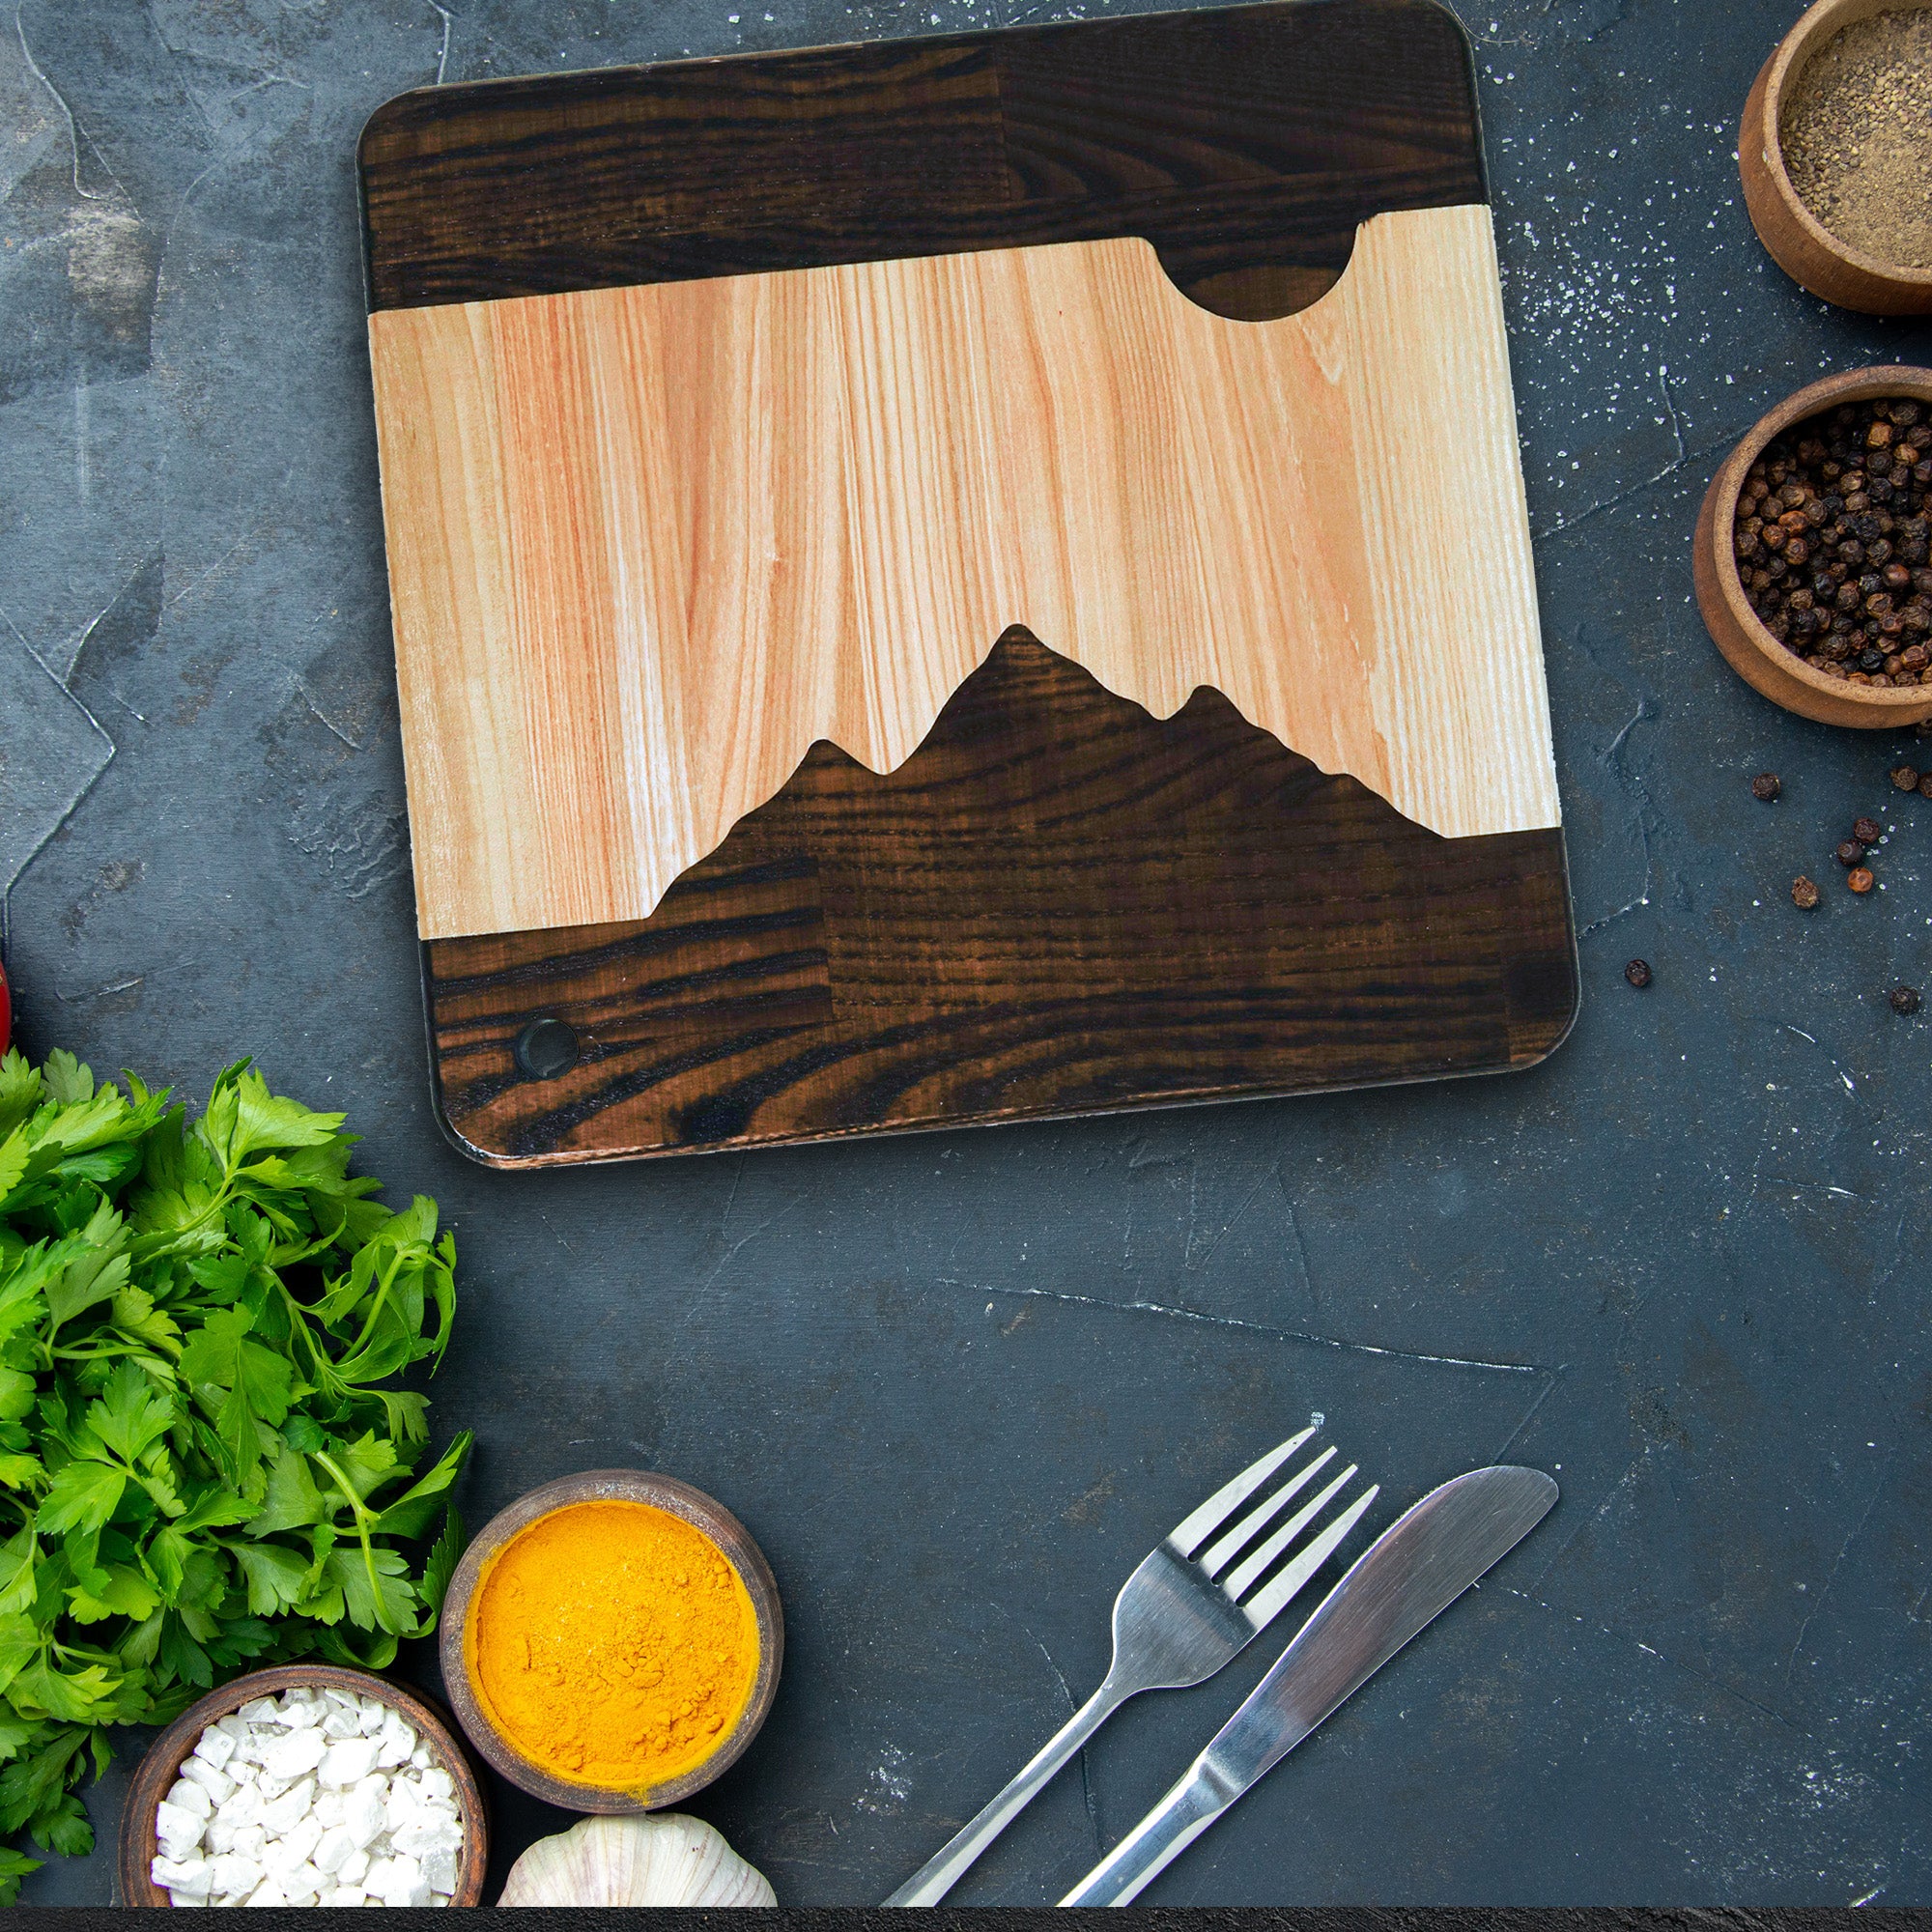 SKY LIGHT Wood Cutting Boards,Acacia Wooden Chopping Board for